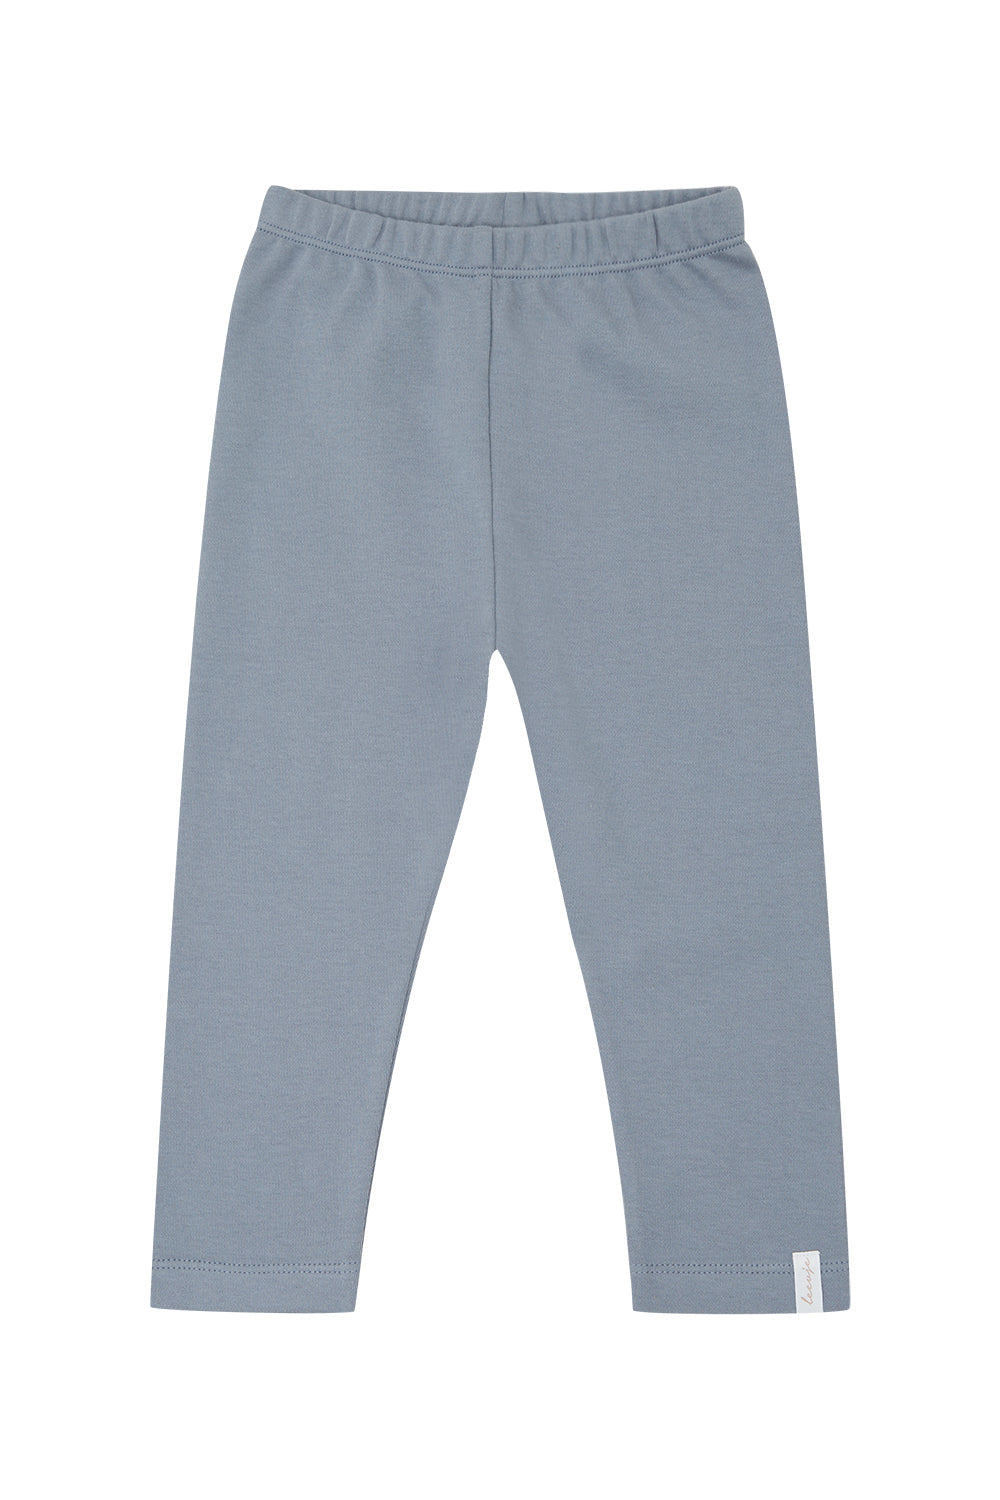 Jersey Leggings aus Bio-Baumwolle 'Blue' - The Little One • Family.Concept.Store. 